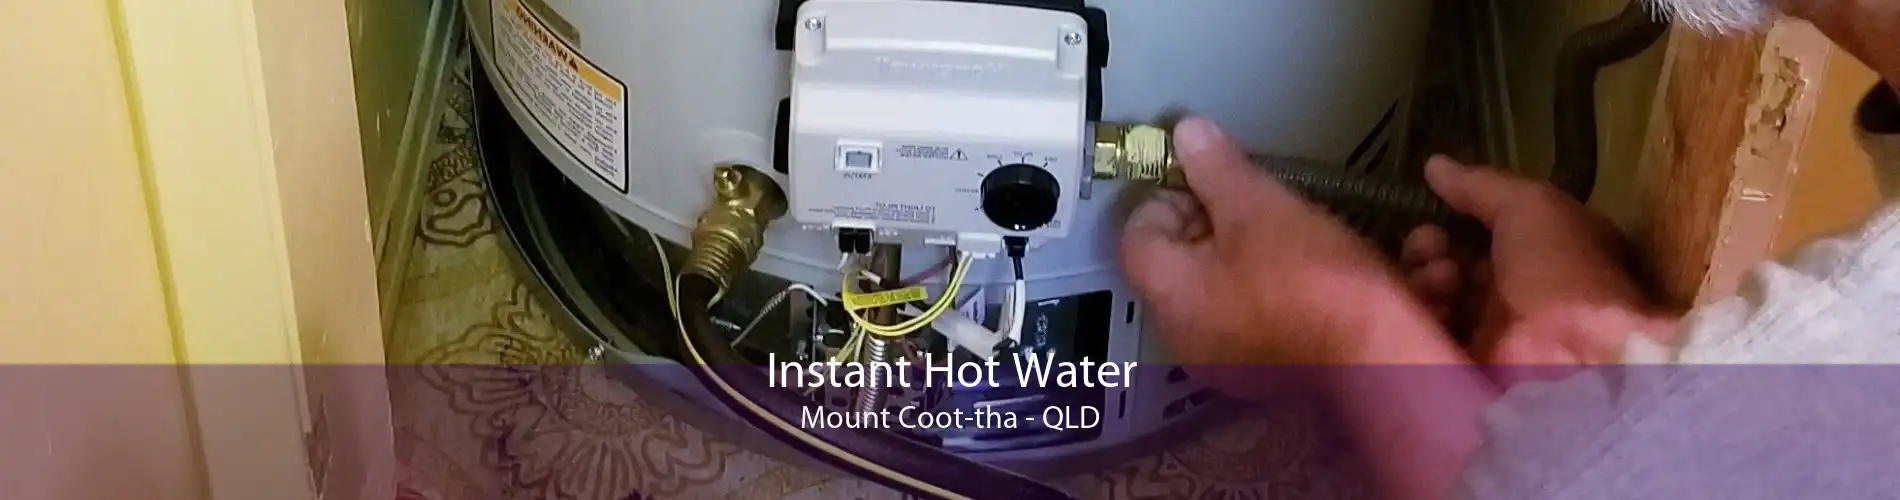 Instant Hot Water Mount Coot-tha - QLD